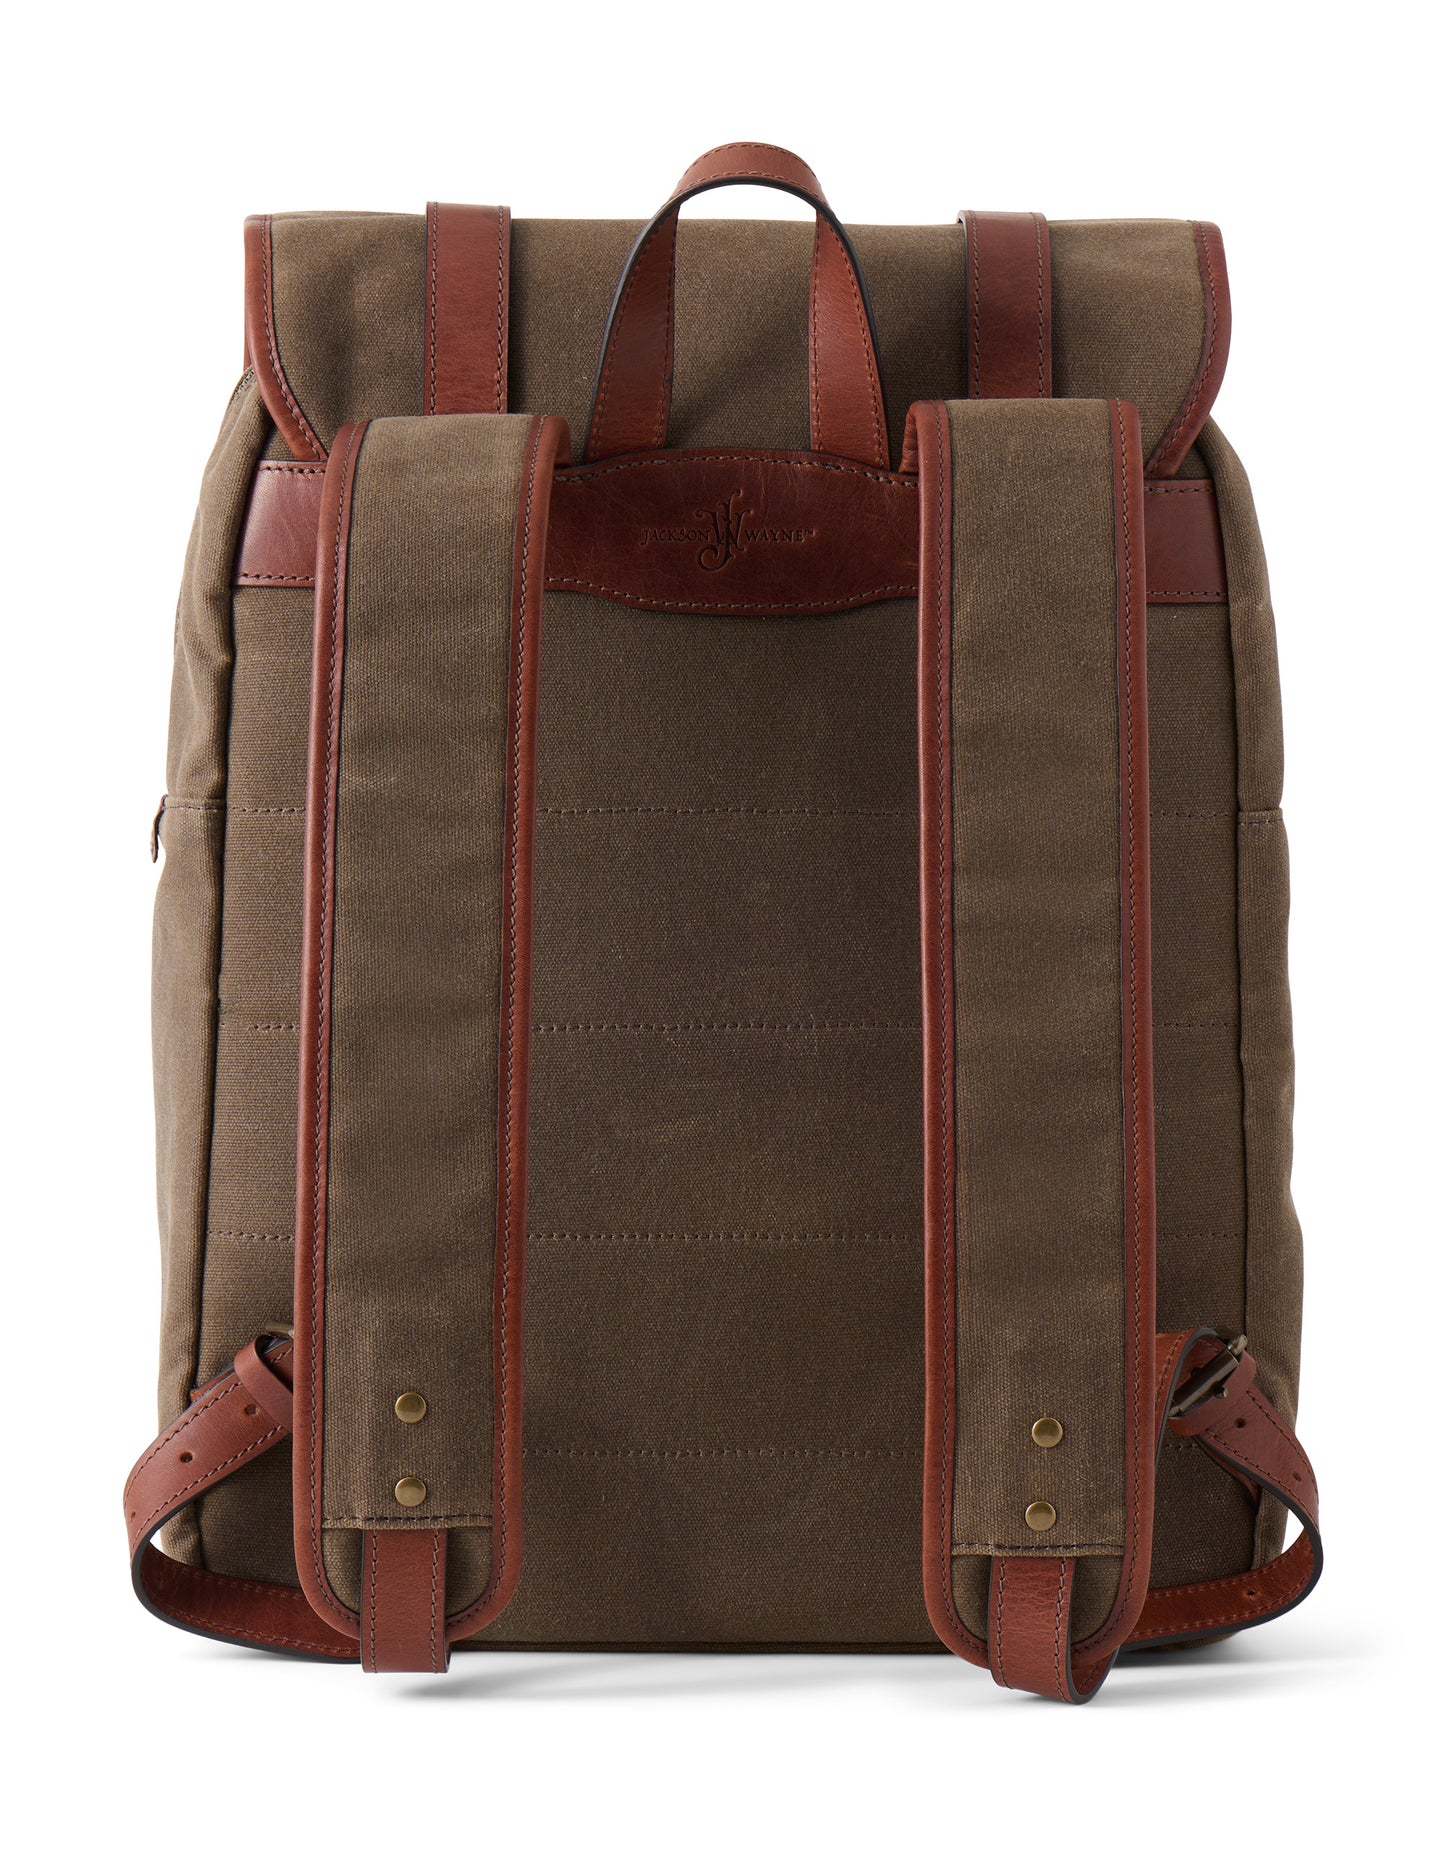 Founder's Backpack by Jackson Wayne, back view pictured in full grain leather and martexin waxed canvas field tan color